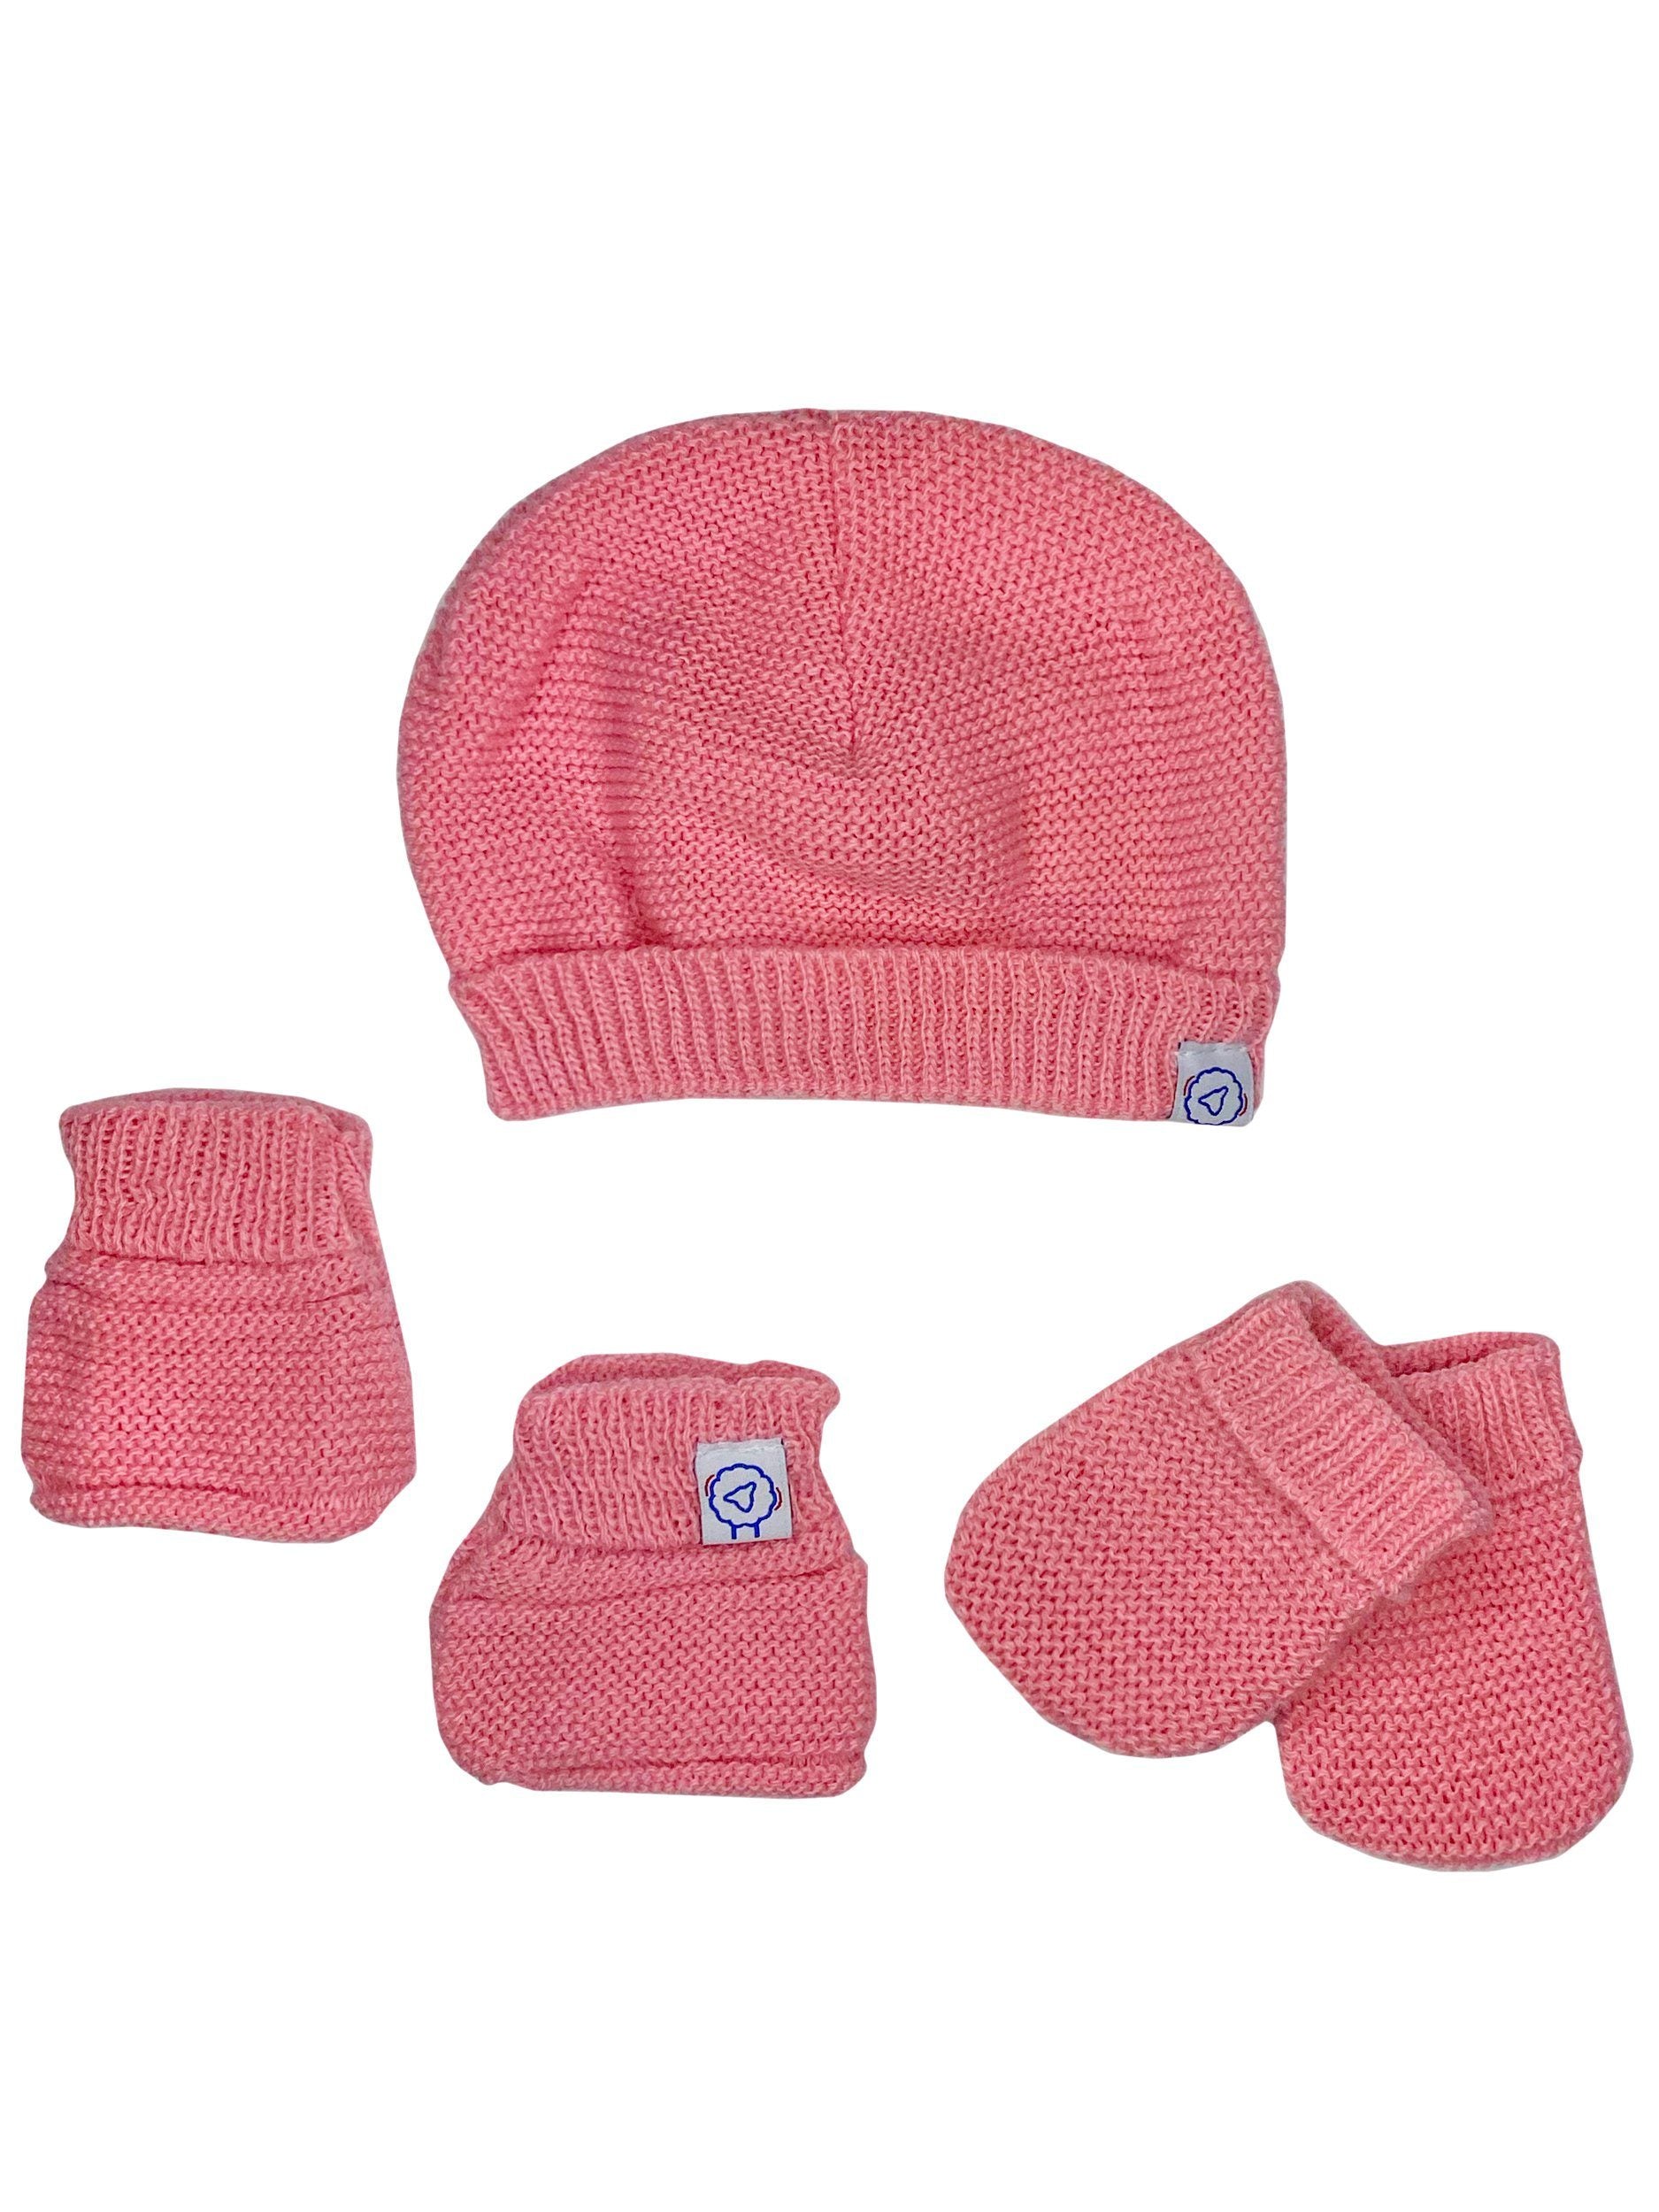 Knitted Hat, Mittens & Booties Set - Dusty Pink - Hat, Mitts & Booties Set - La Manufacture de Layette